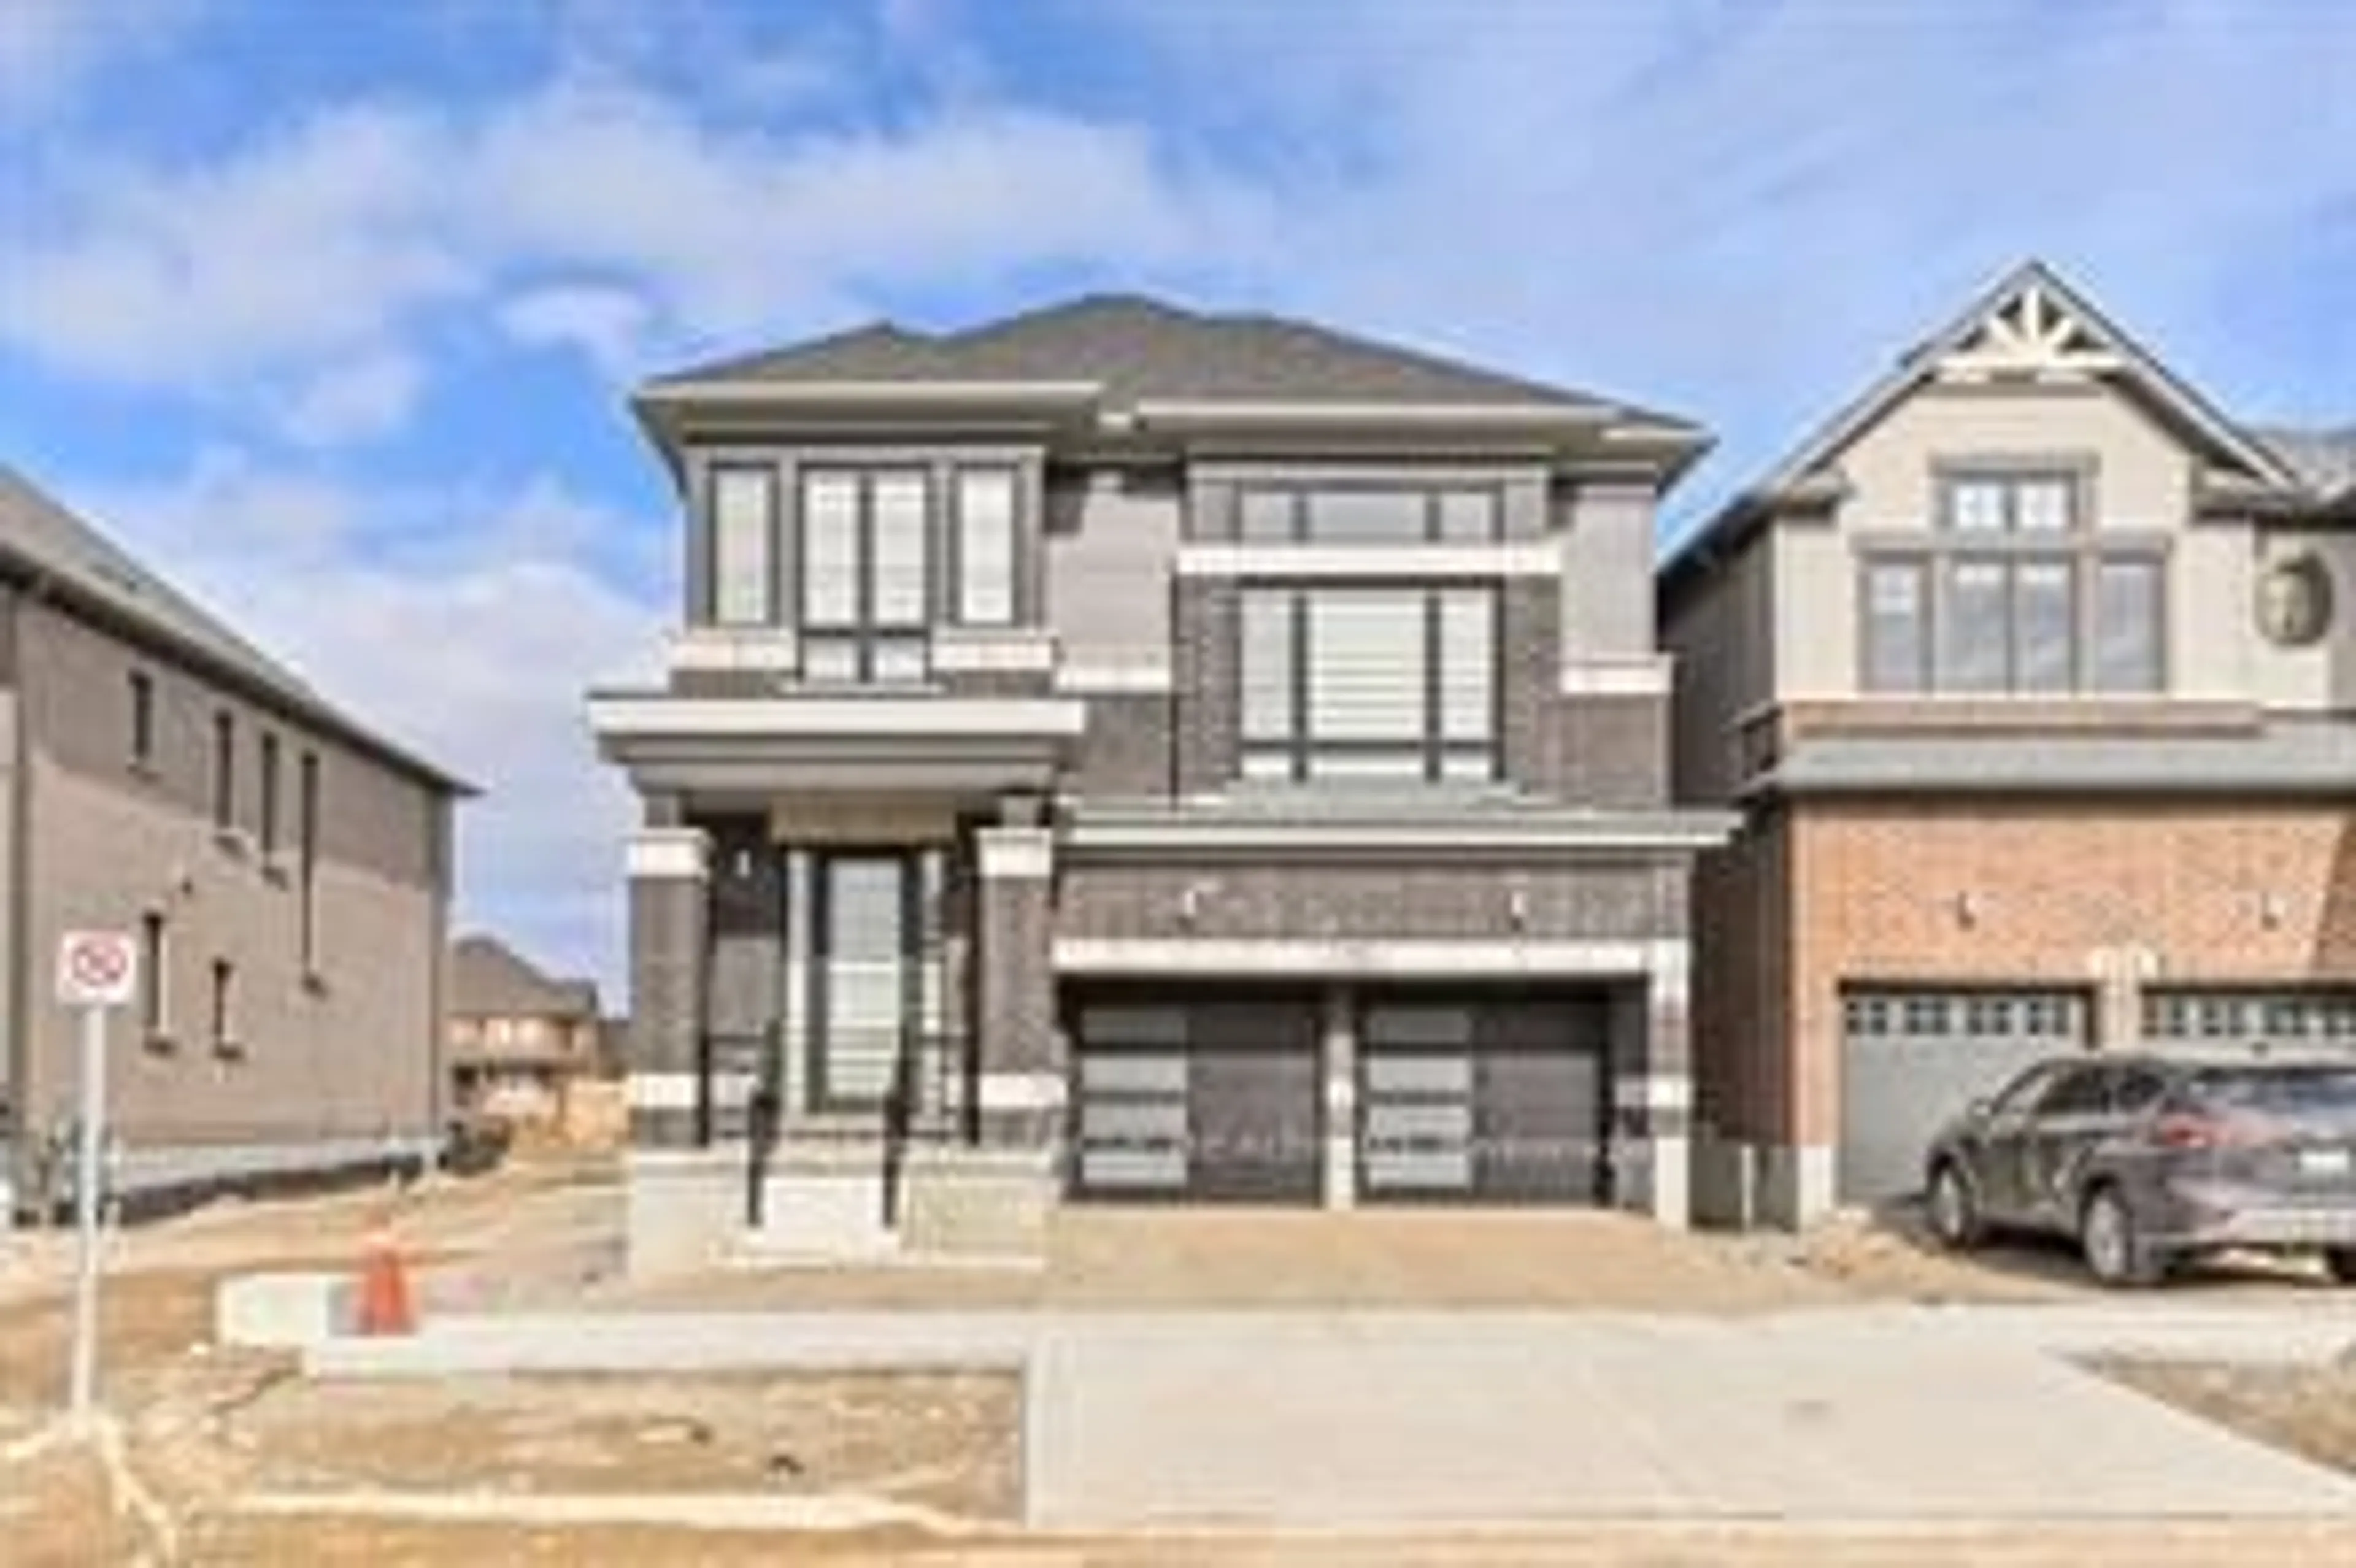 Home with brick exterior material for 120 Blacklock St, Cambridge Ontario N1S 0E3